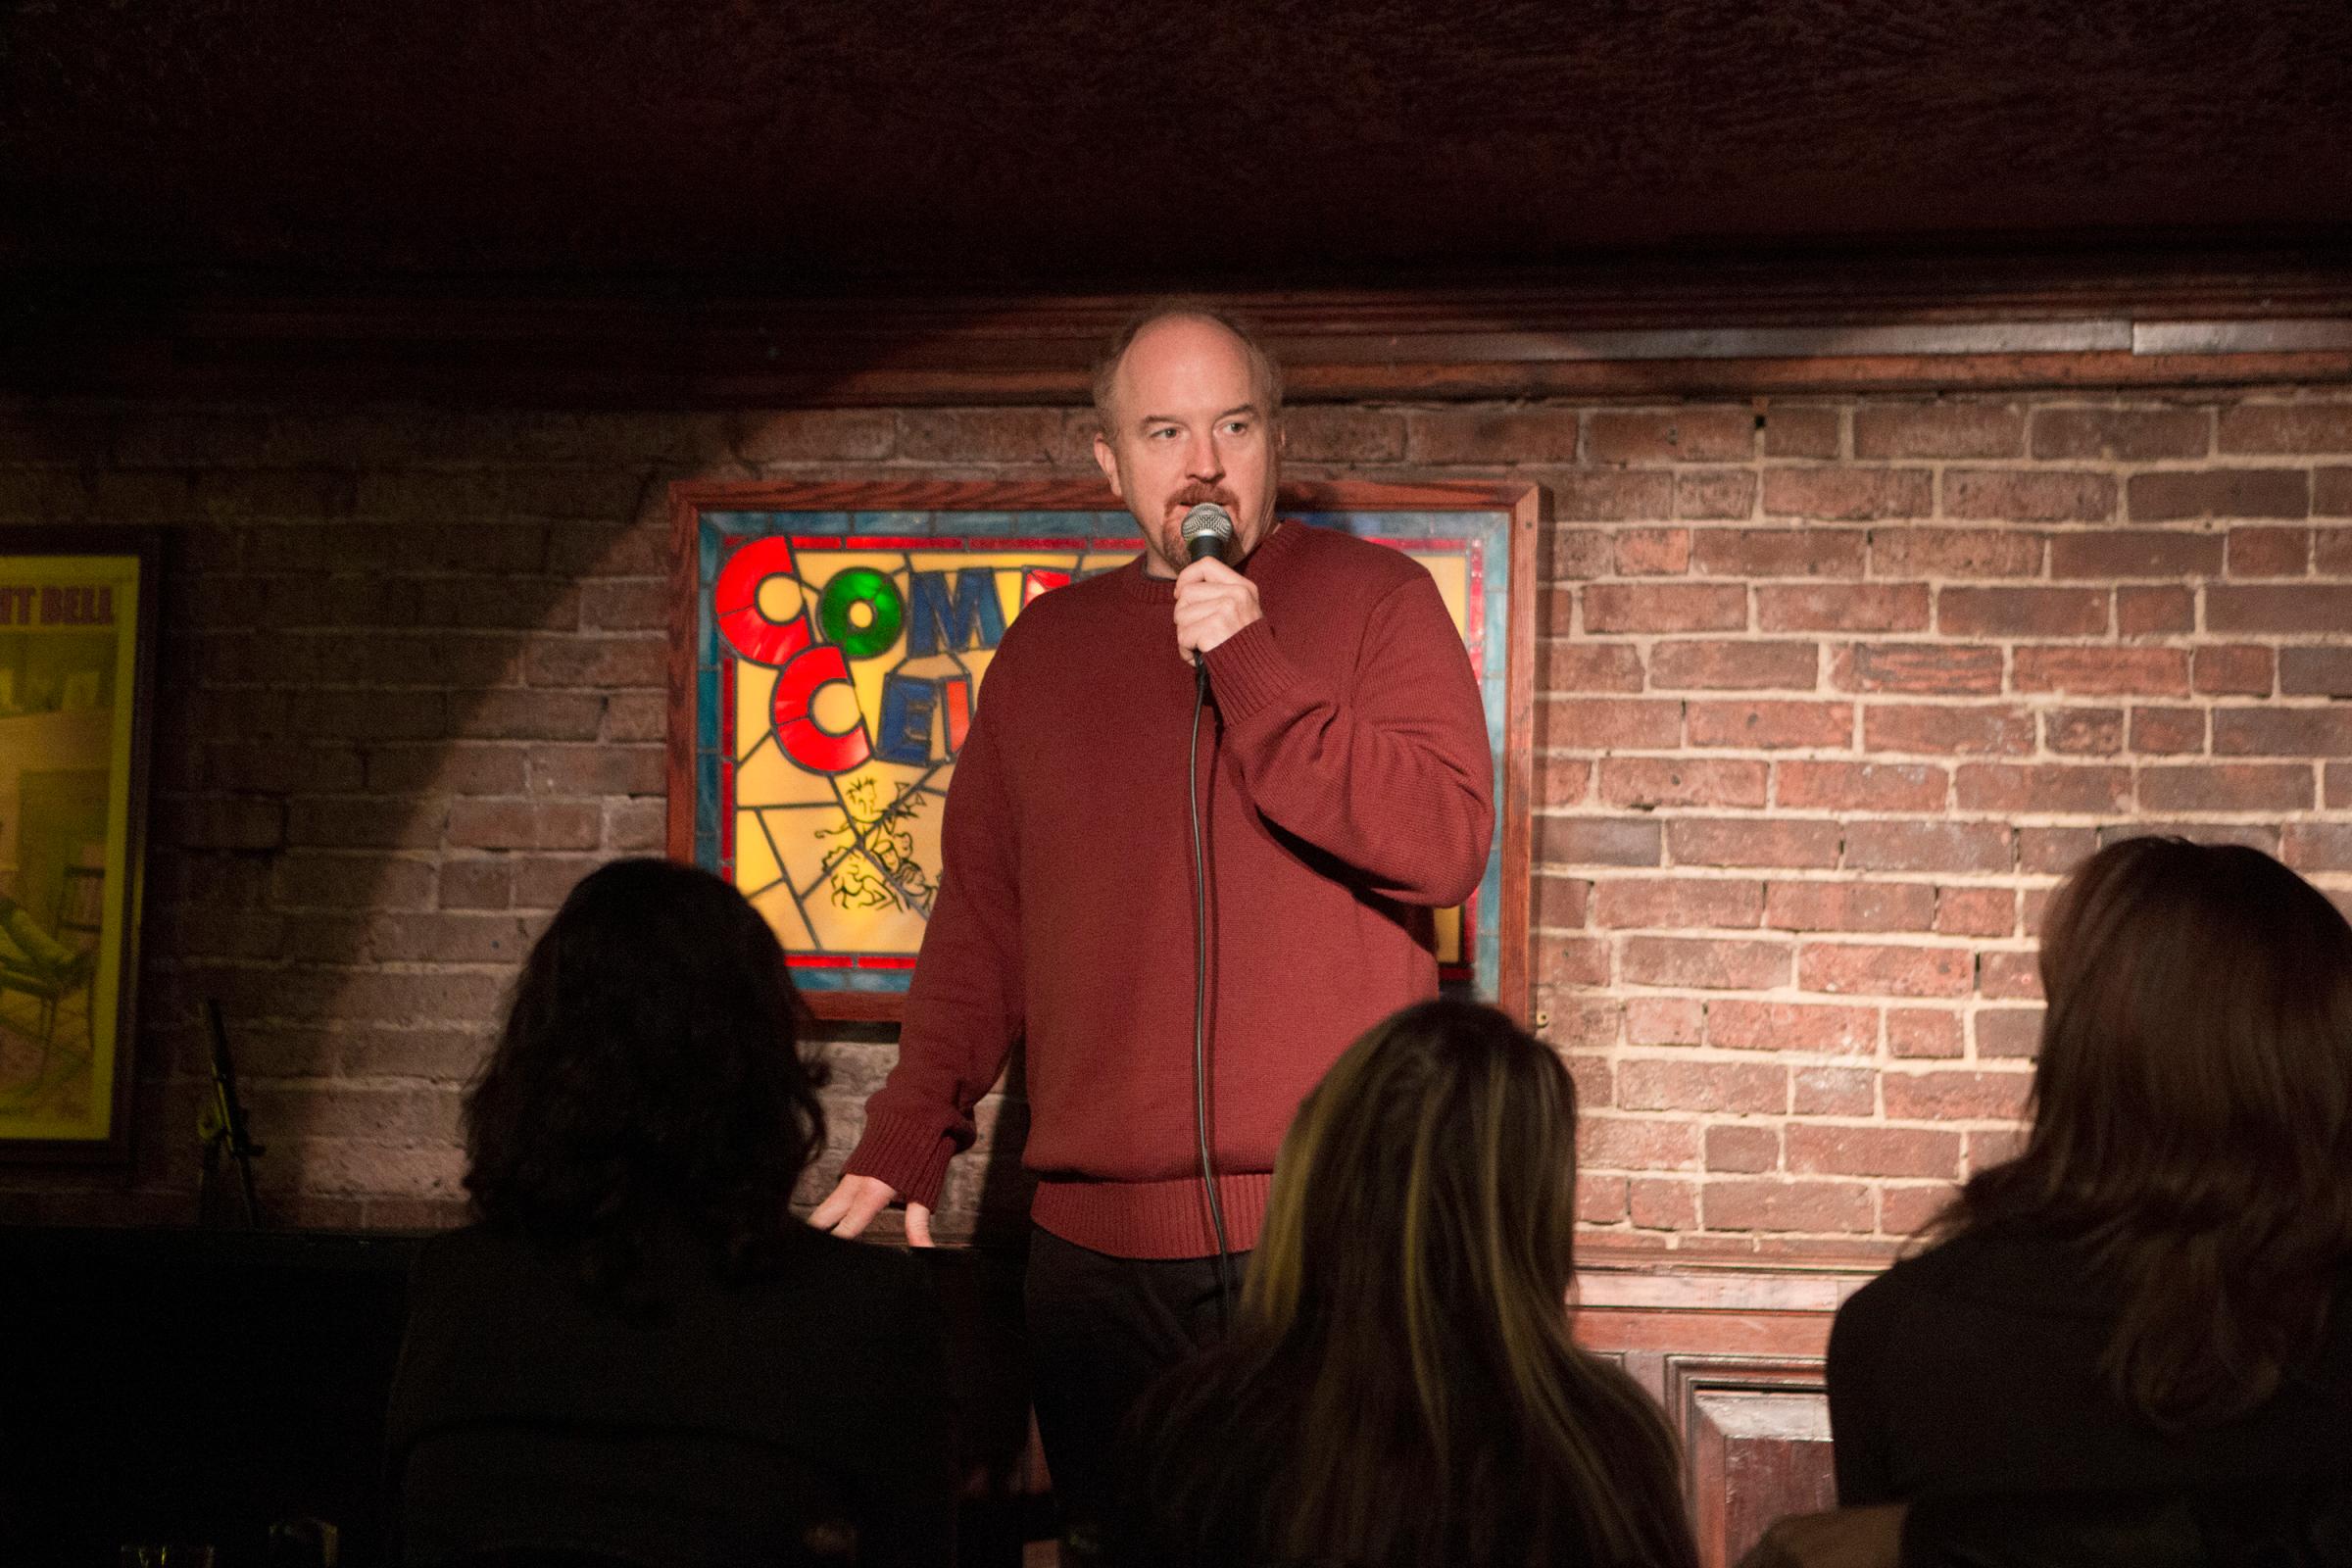 LOUIE: Episode 8: "Elevator Part 5" (Airs Monday, May 26, 10:30 pm e/p). Pictured: Louis C.K. as Louie. CR: KC Bailey/FX